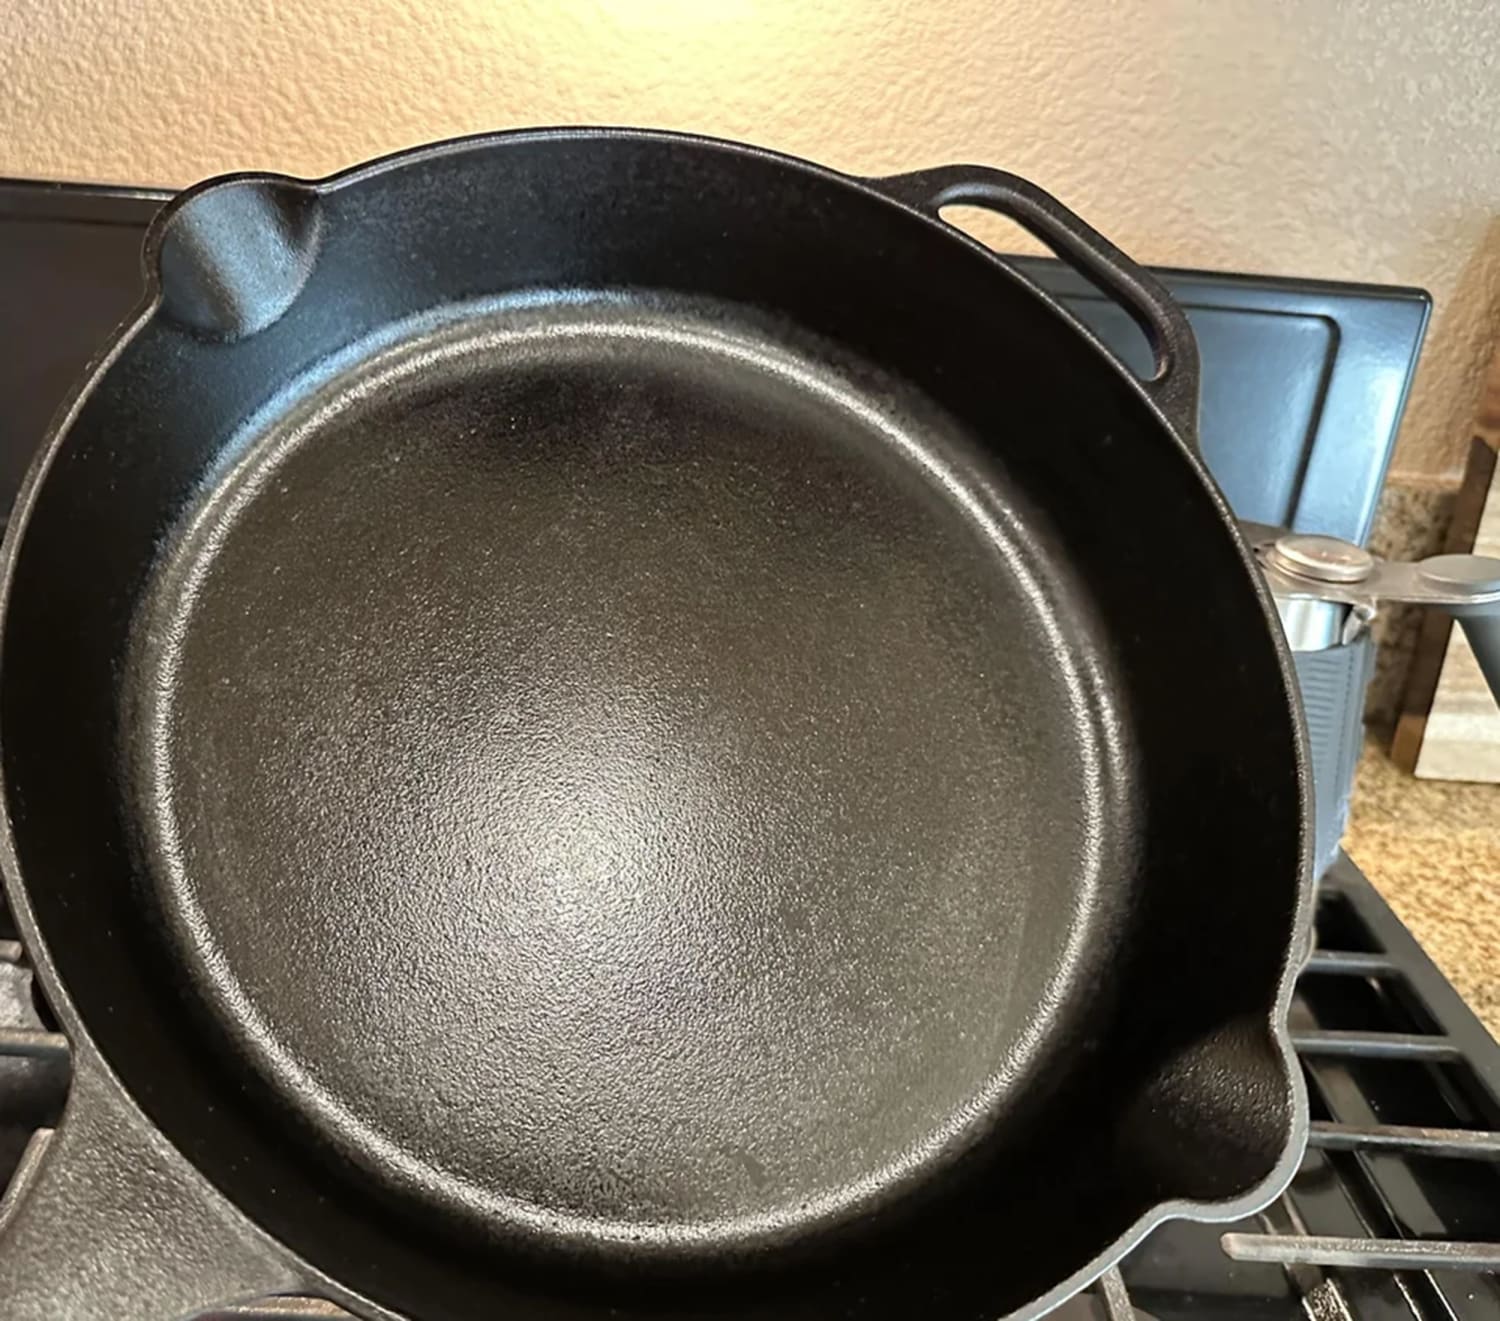 Cooking with Cast Iron: Tried and True Through the Ages